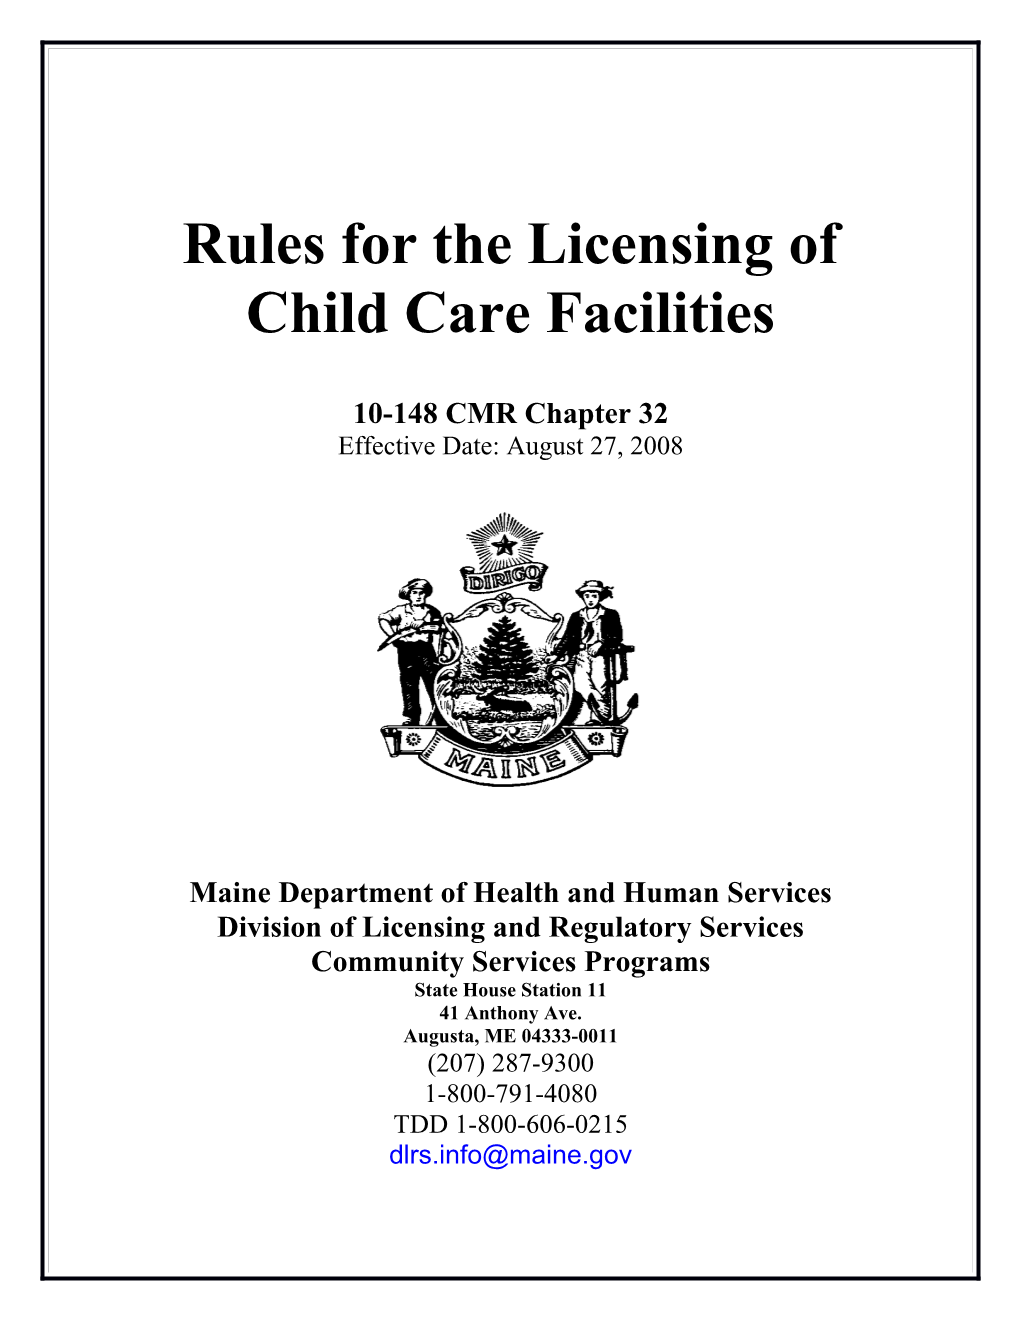 Rules for the Licensing of Child Care Facilities